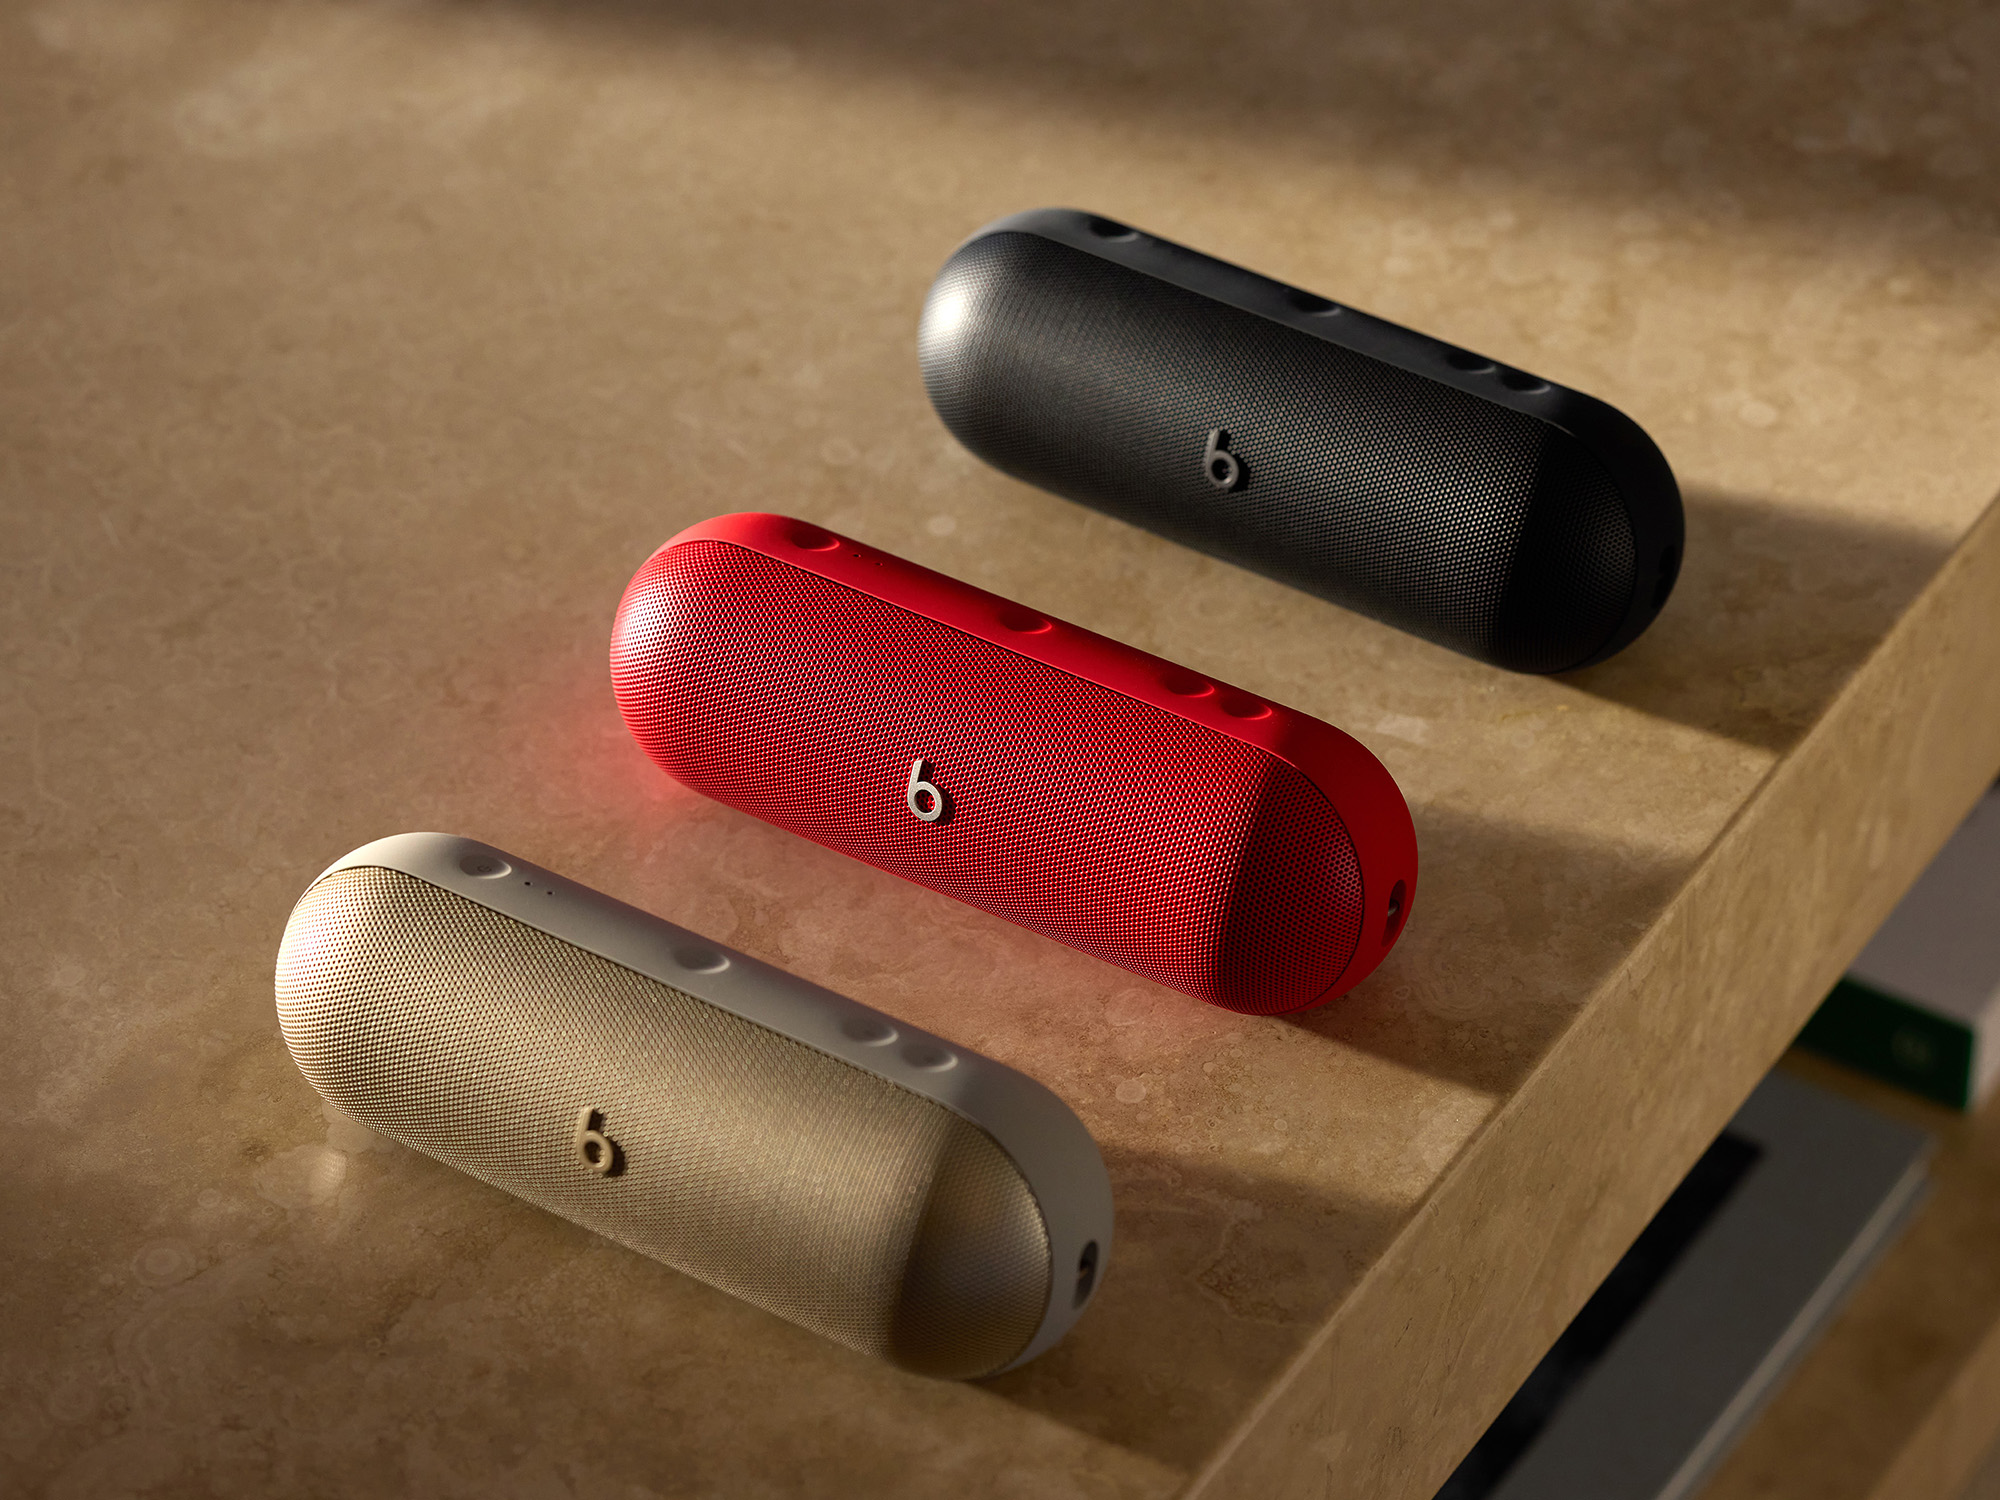 The three colors of Beats Pill: gold, red, and black.